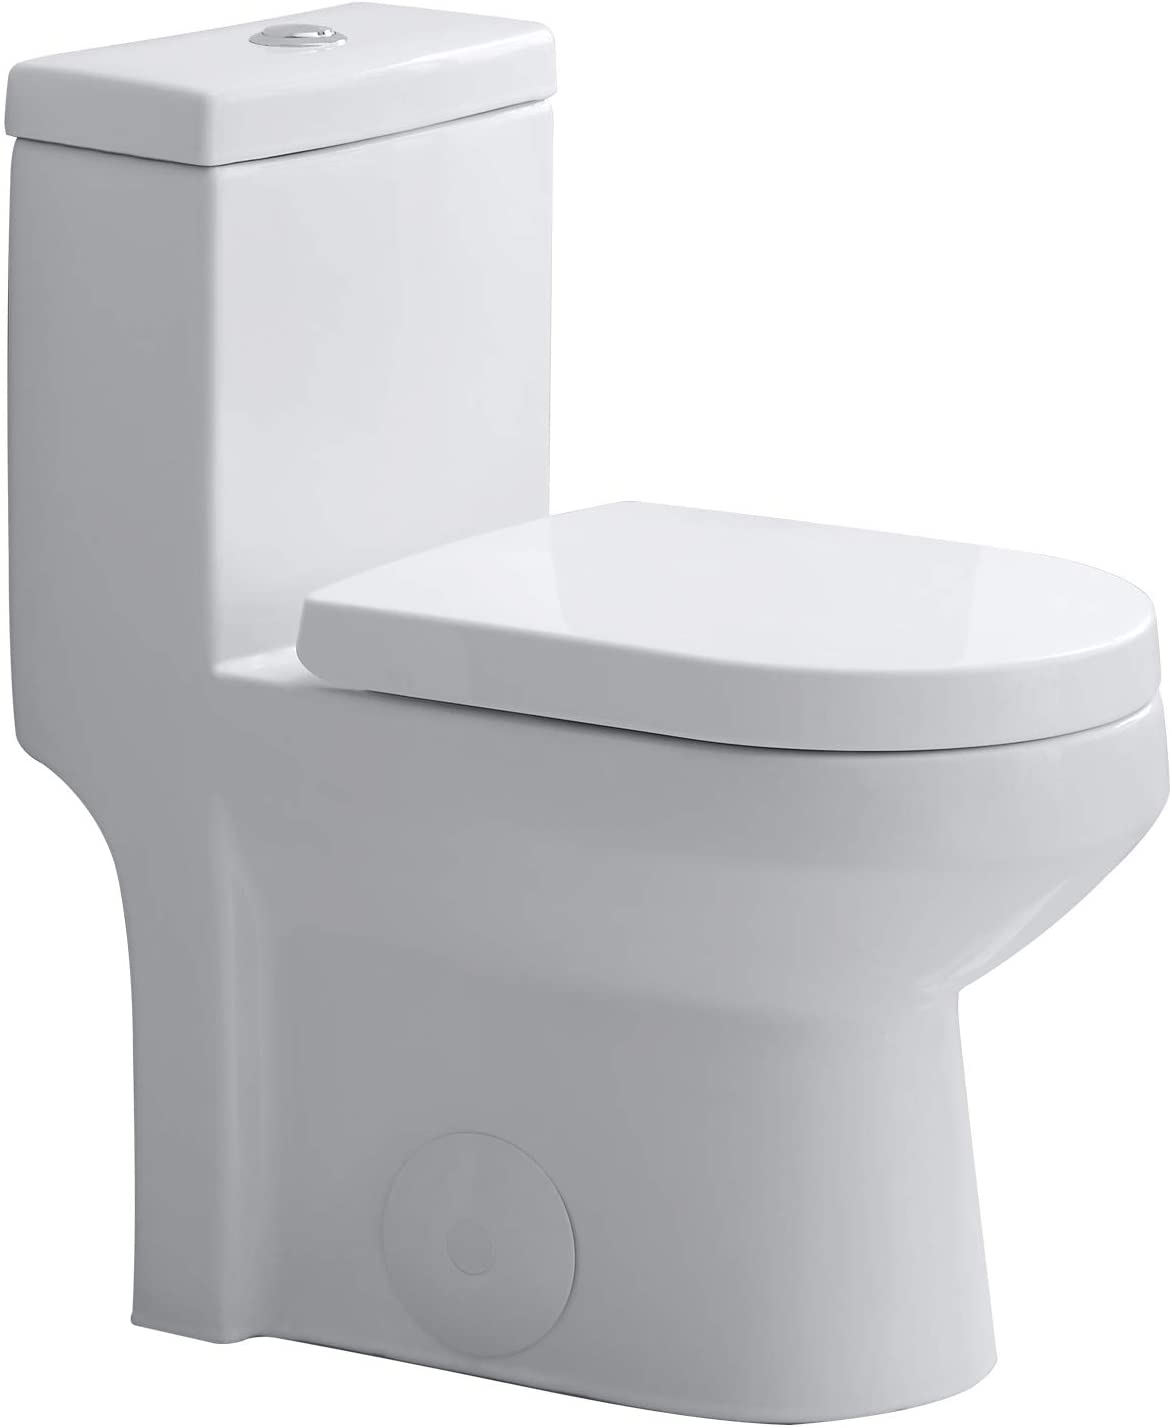 HOROW Small Space Compact Toilet